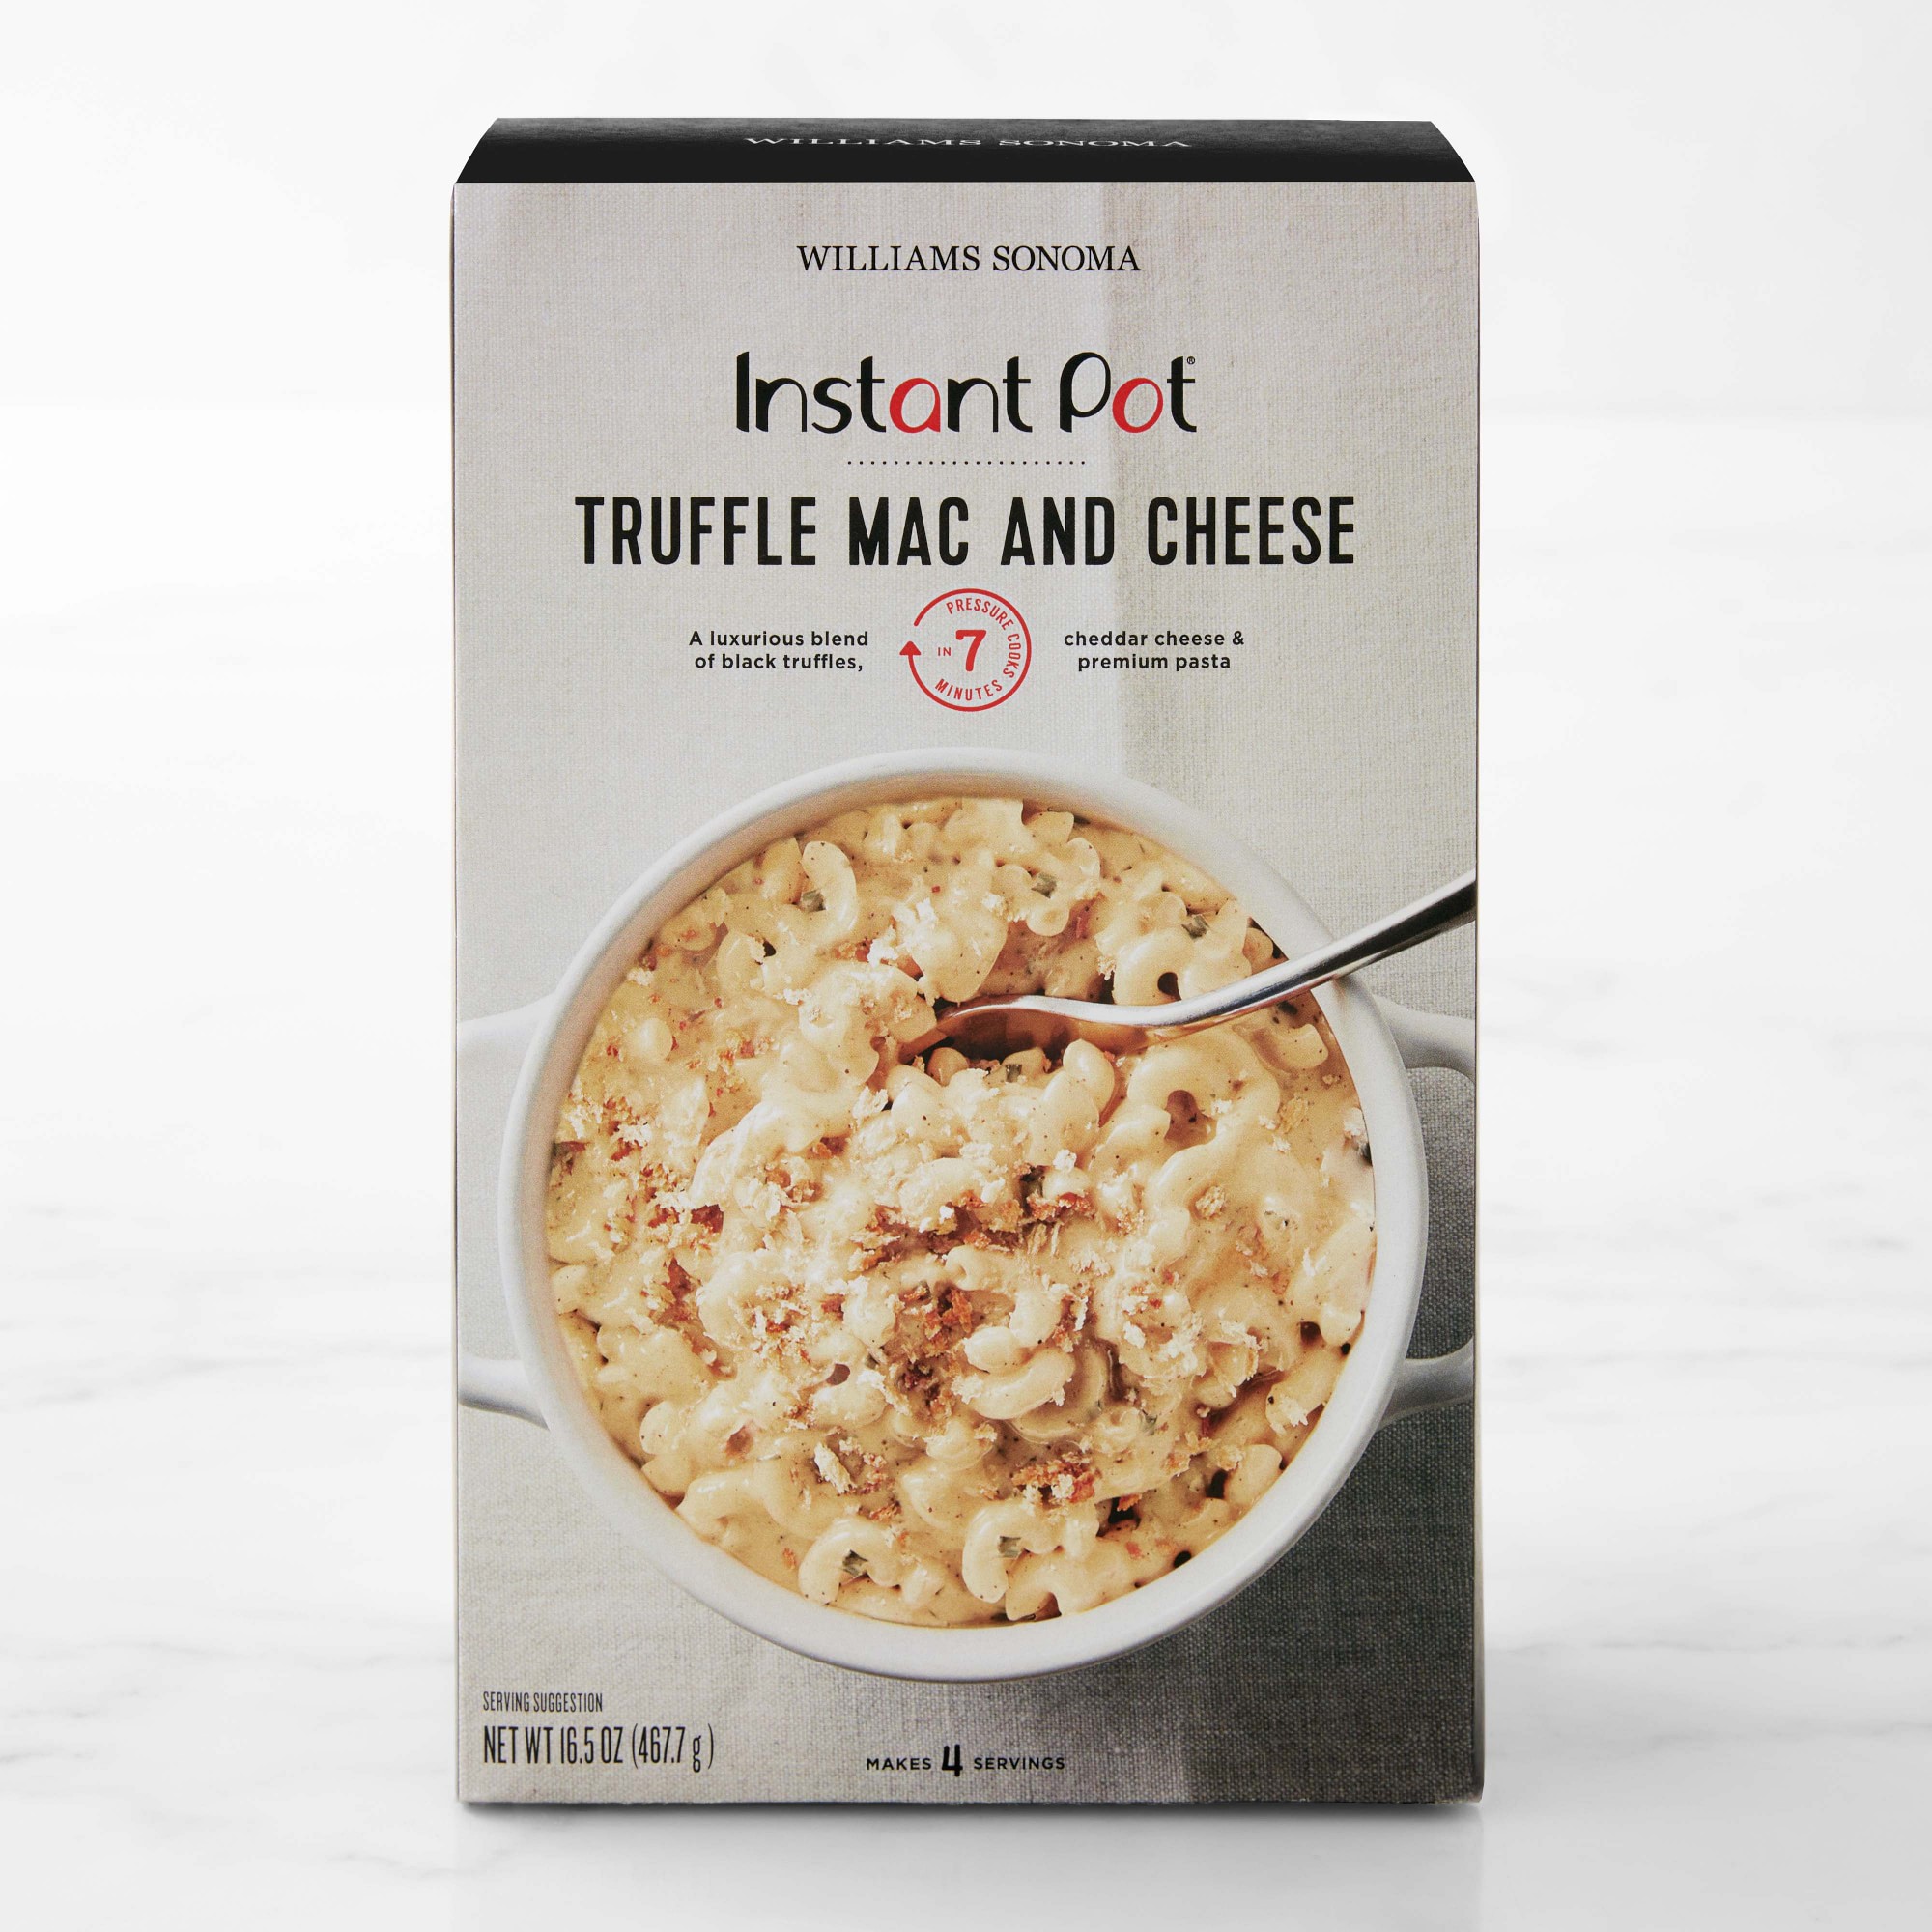 Instant Pot Truffle Mac and Cheese